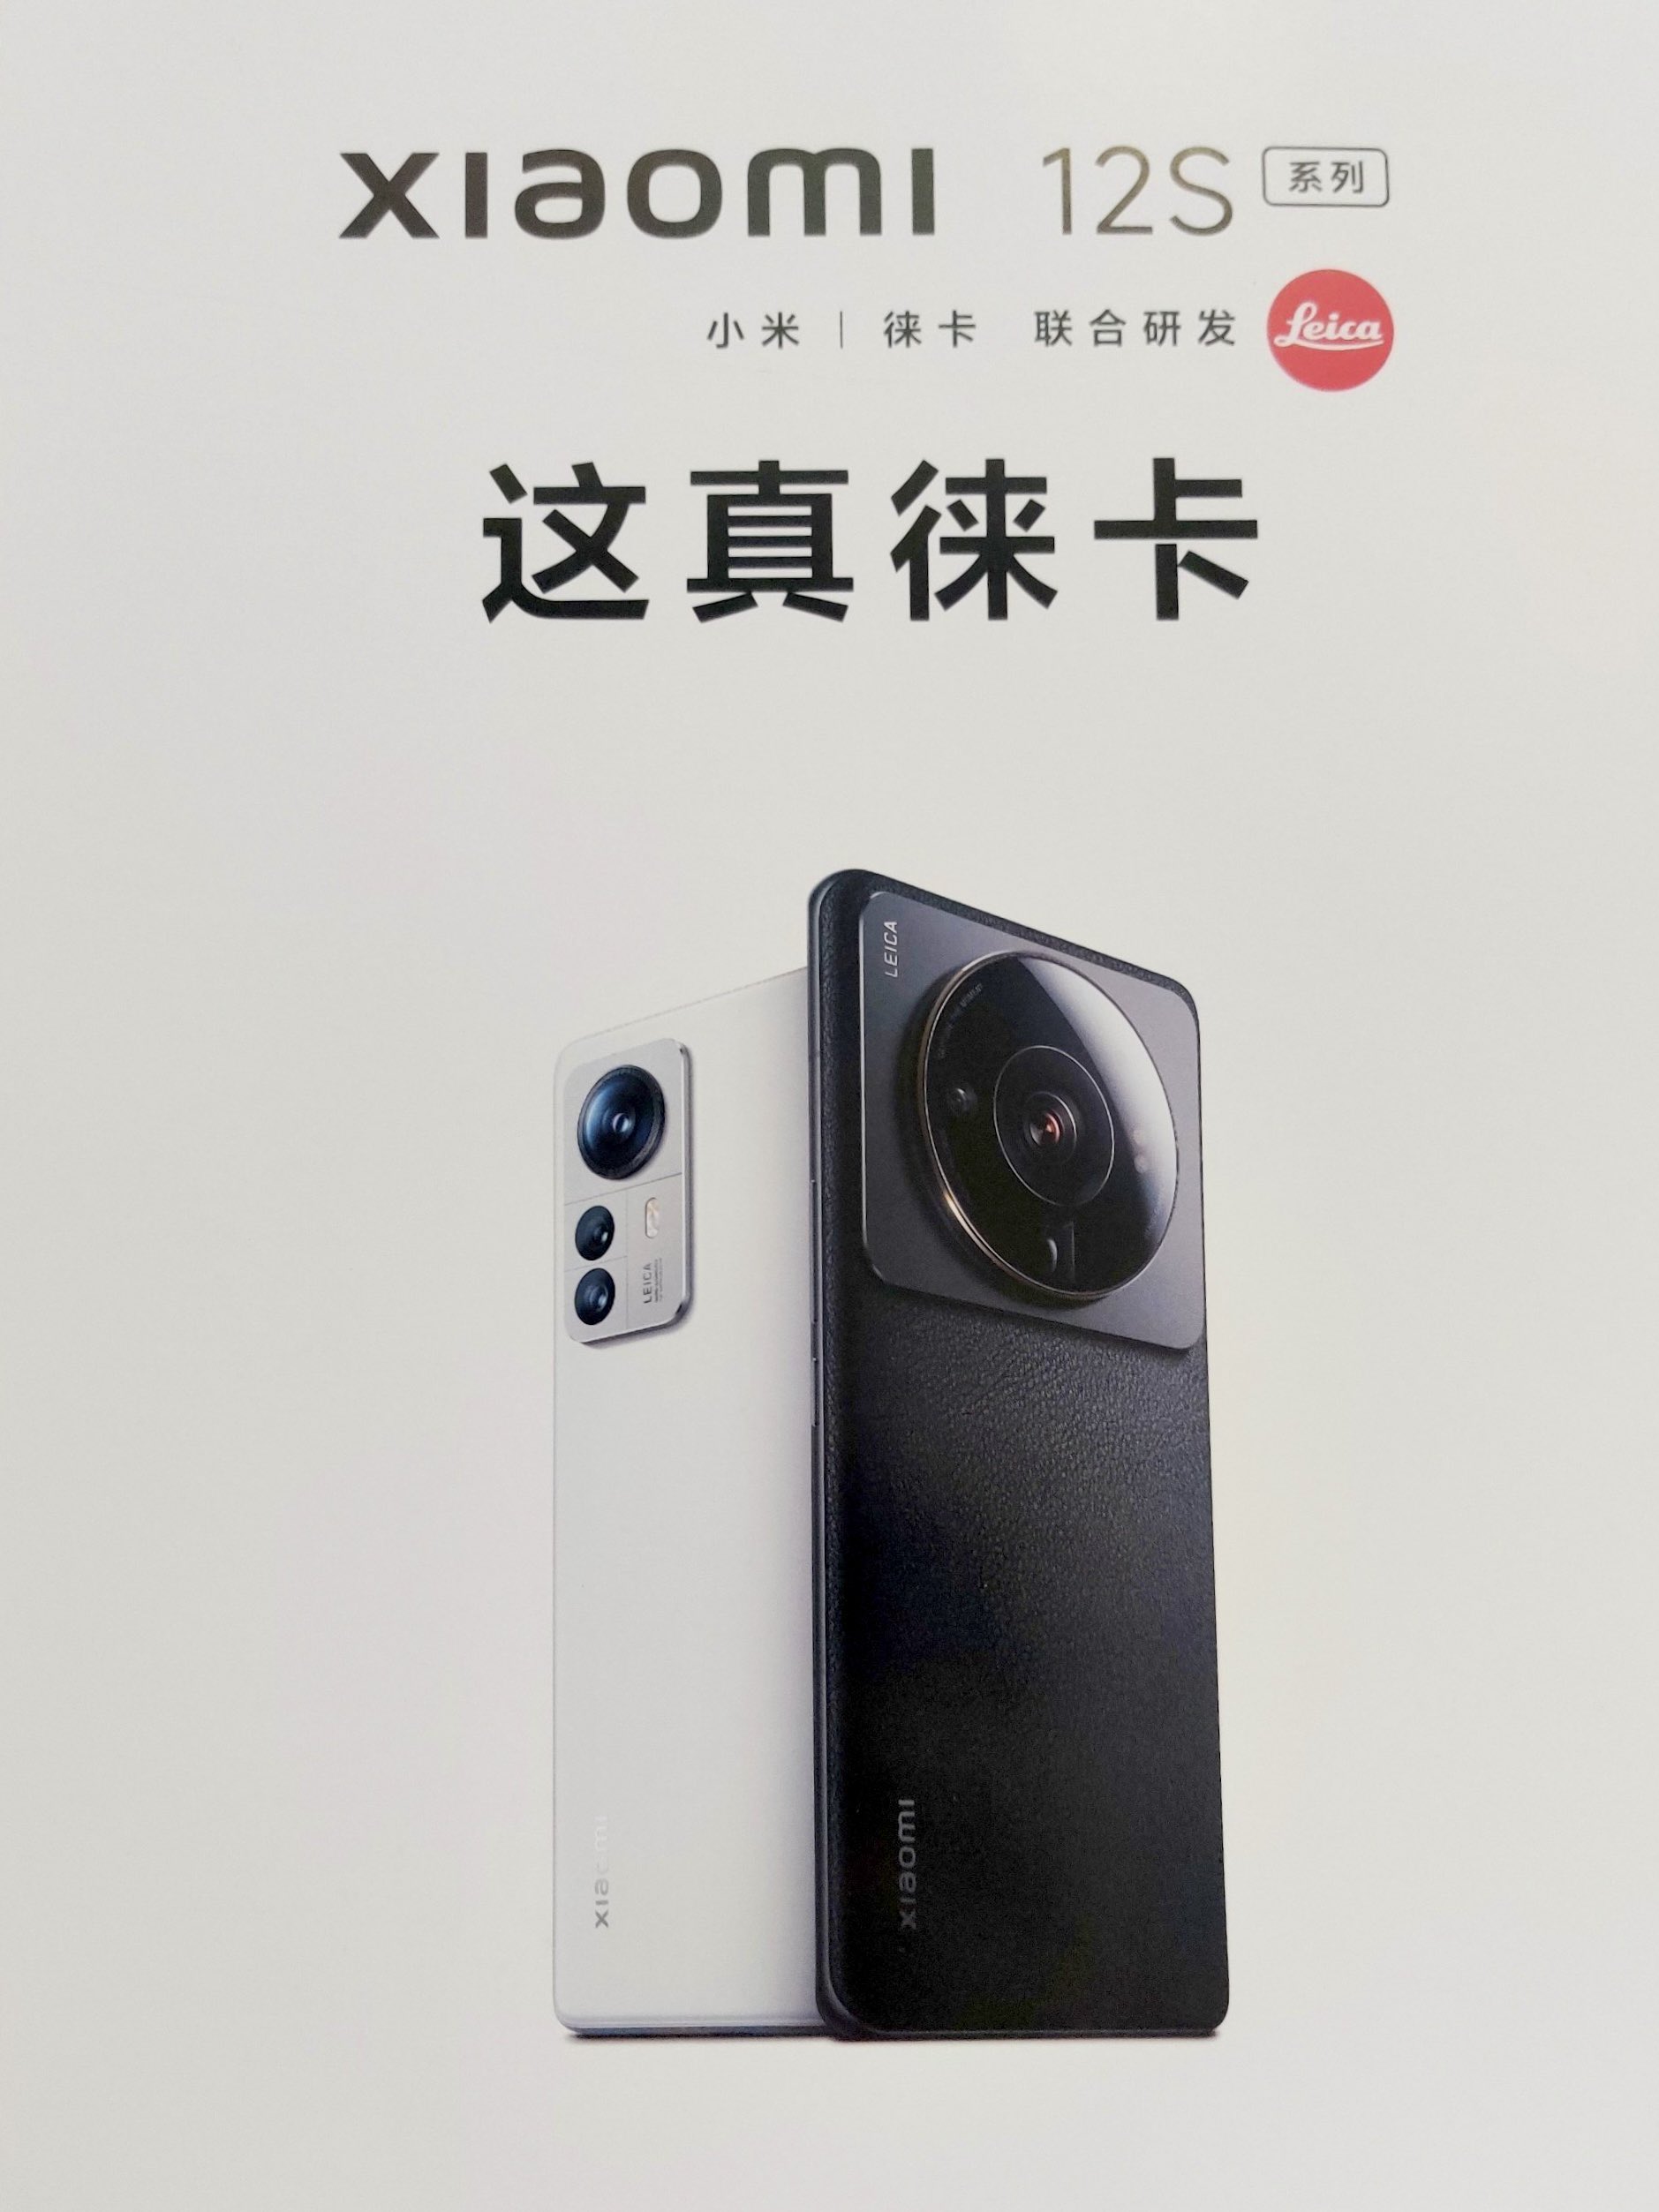 Xiaomi 12S Ultra leaked poster 2